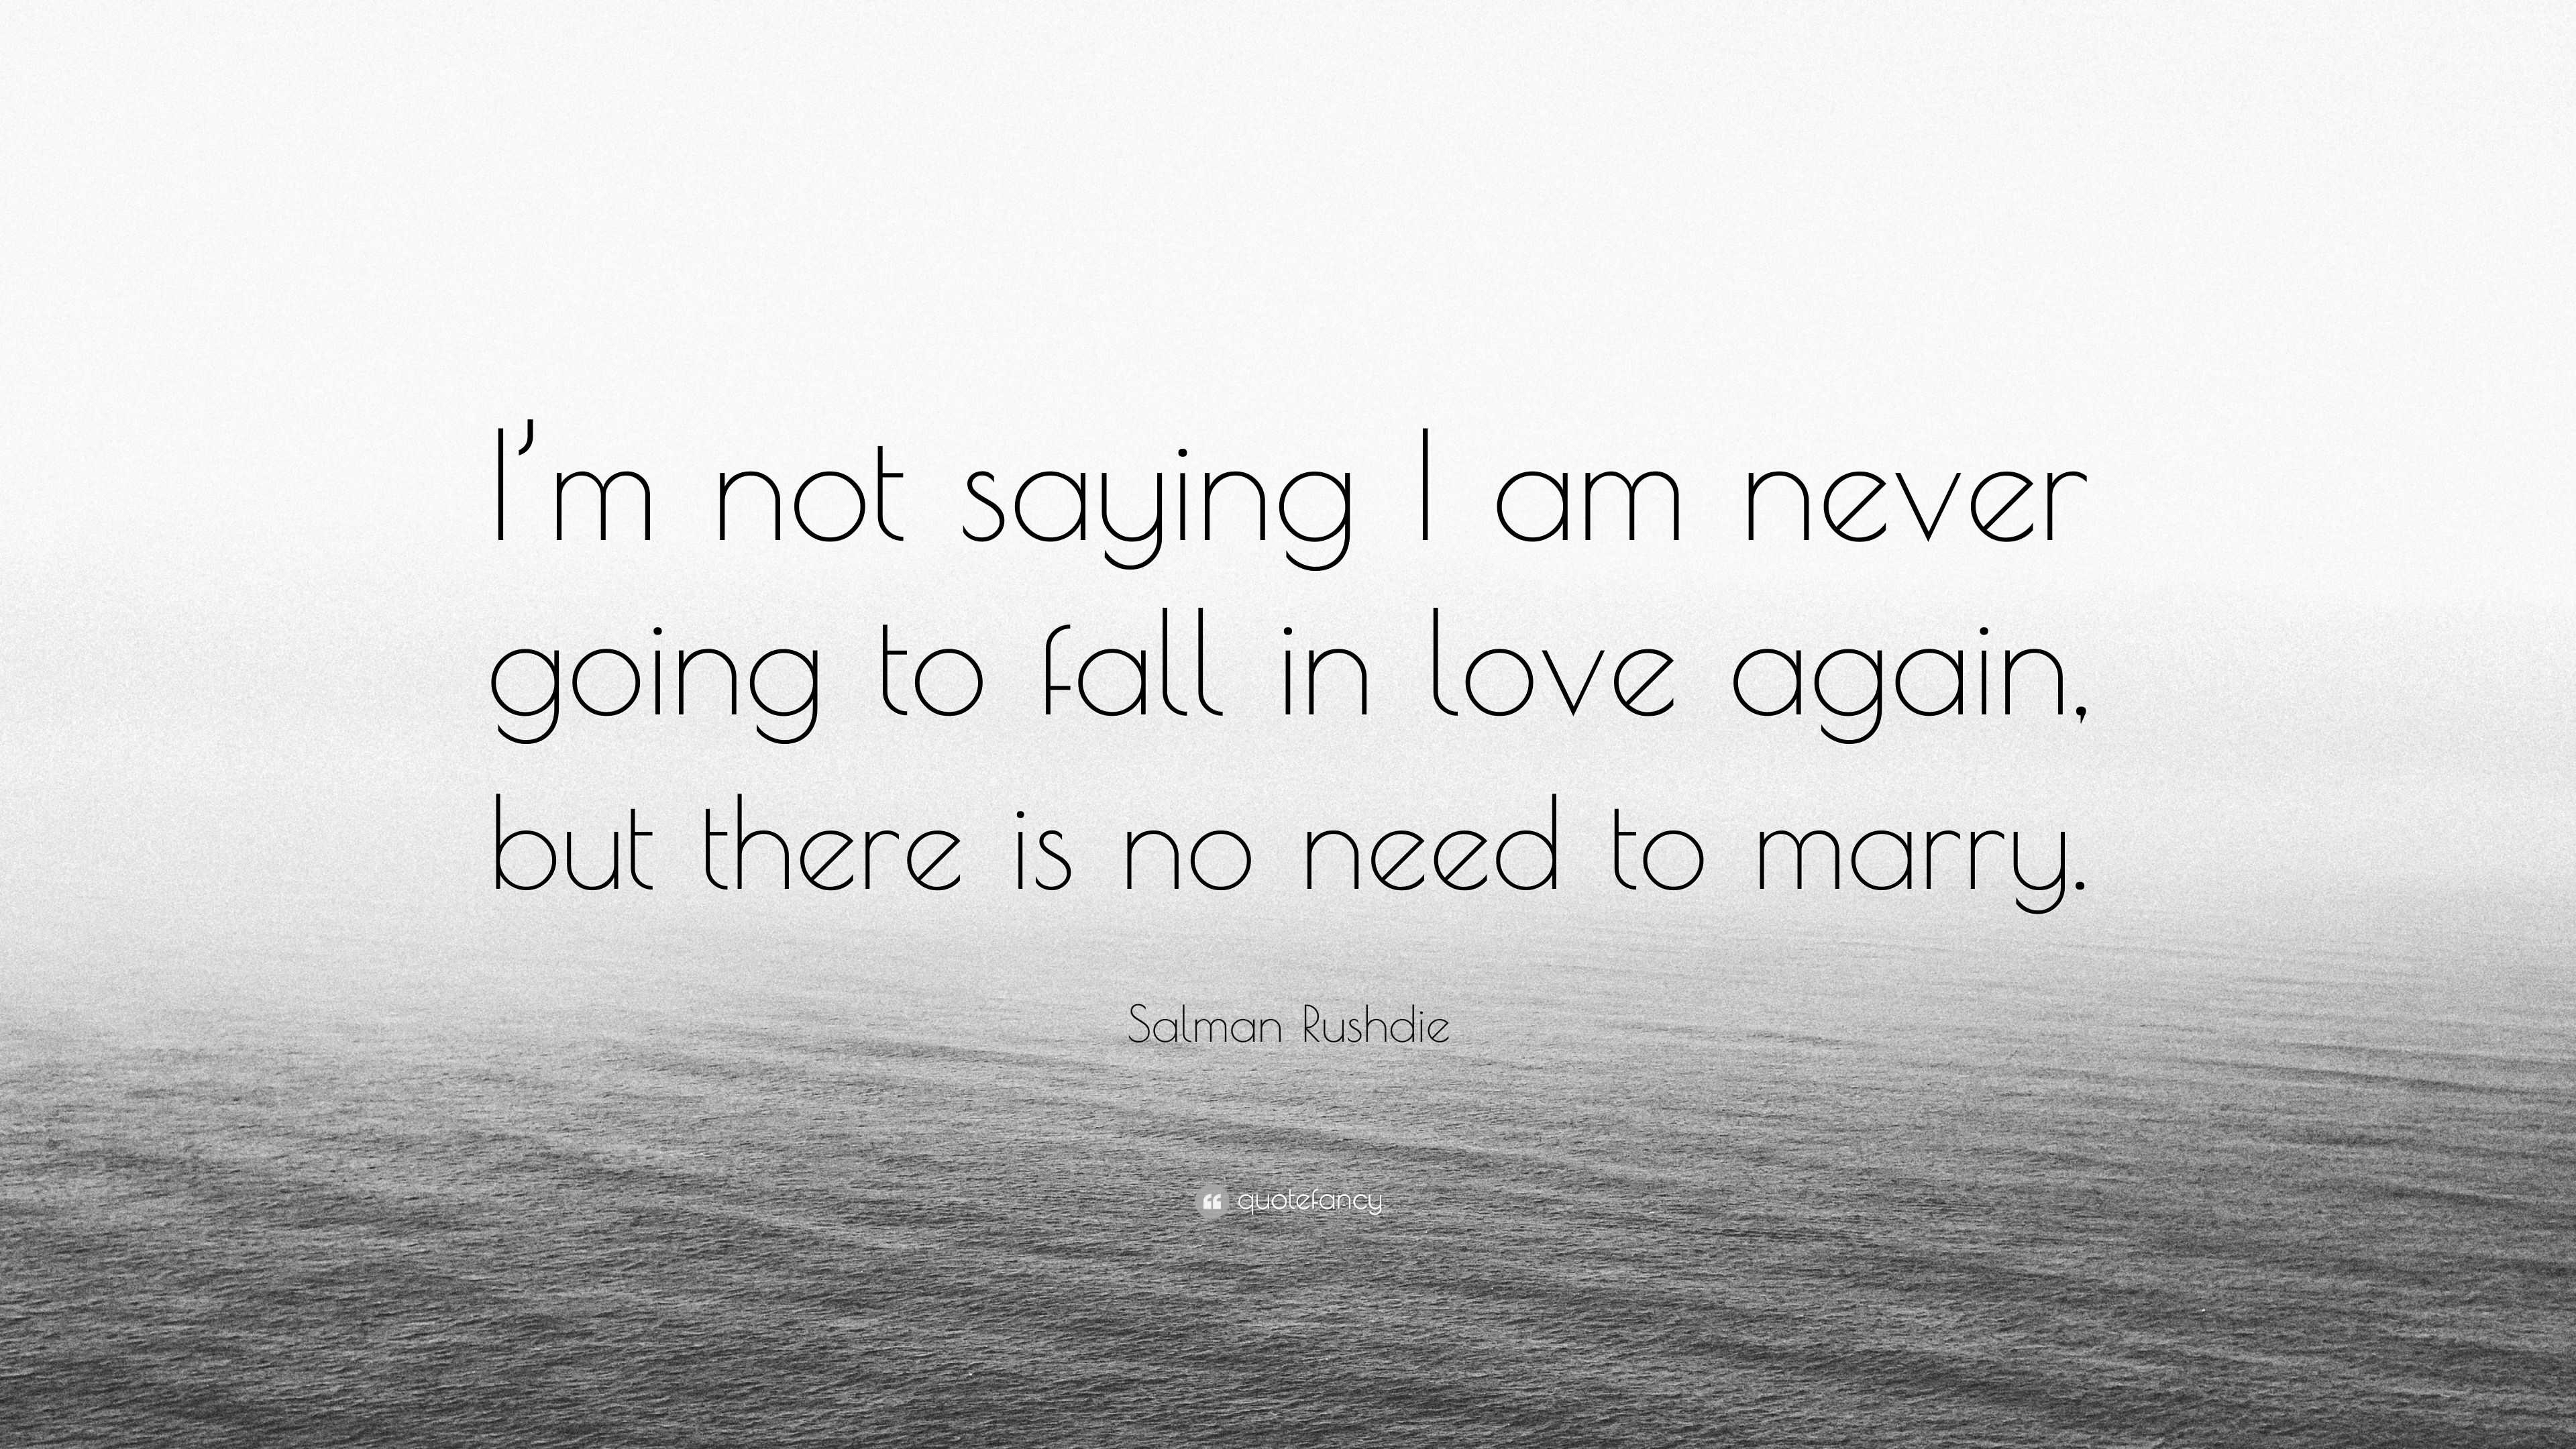 Salman Rush Quote “I m not saying I am never going to fall